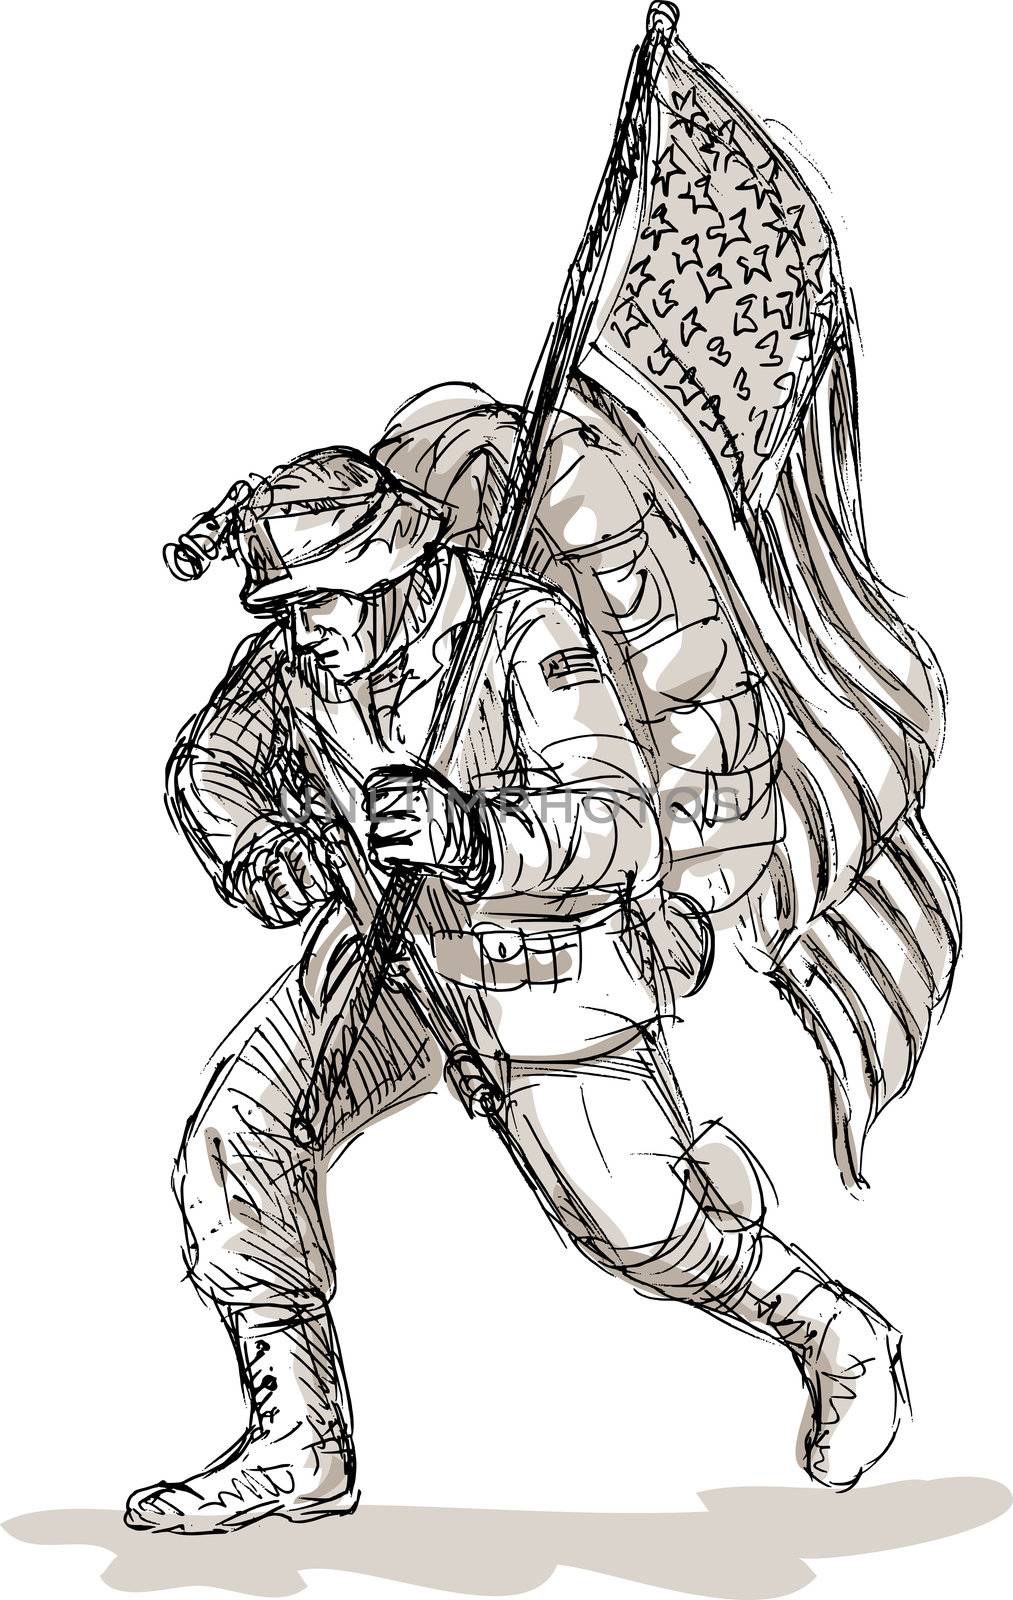 hand drawn sketch of a Dejected American soldier in full battle gear carrying flag isolated on white background